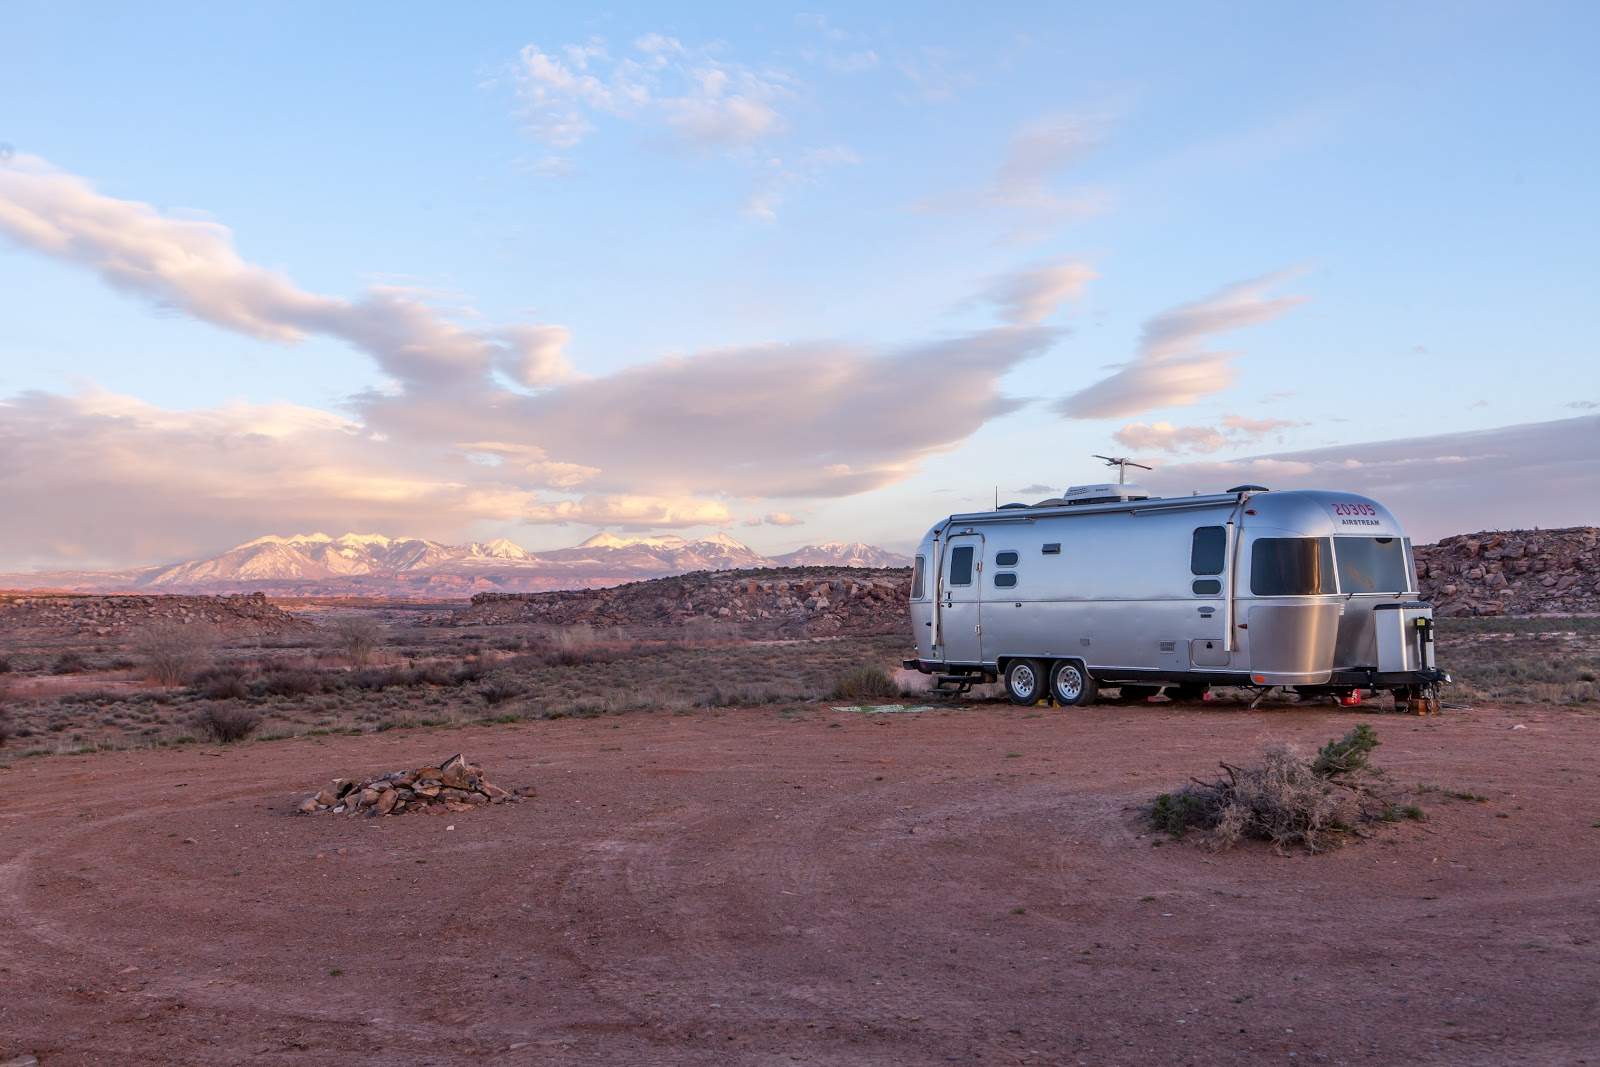 The Ultimate Guide For Finding the BEST Spots to Park Your RV